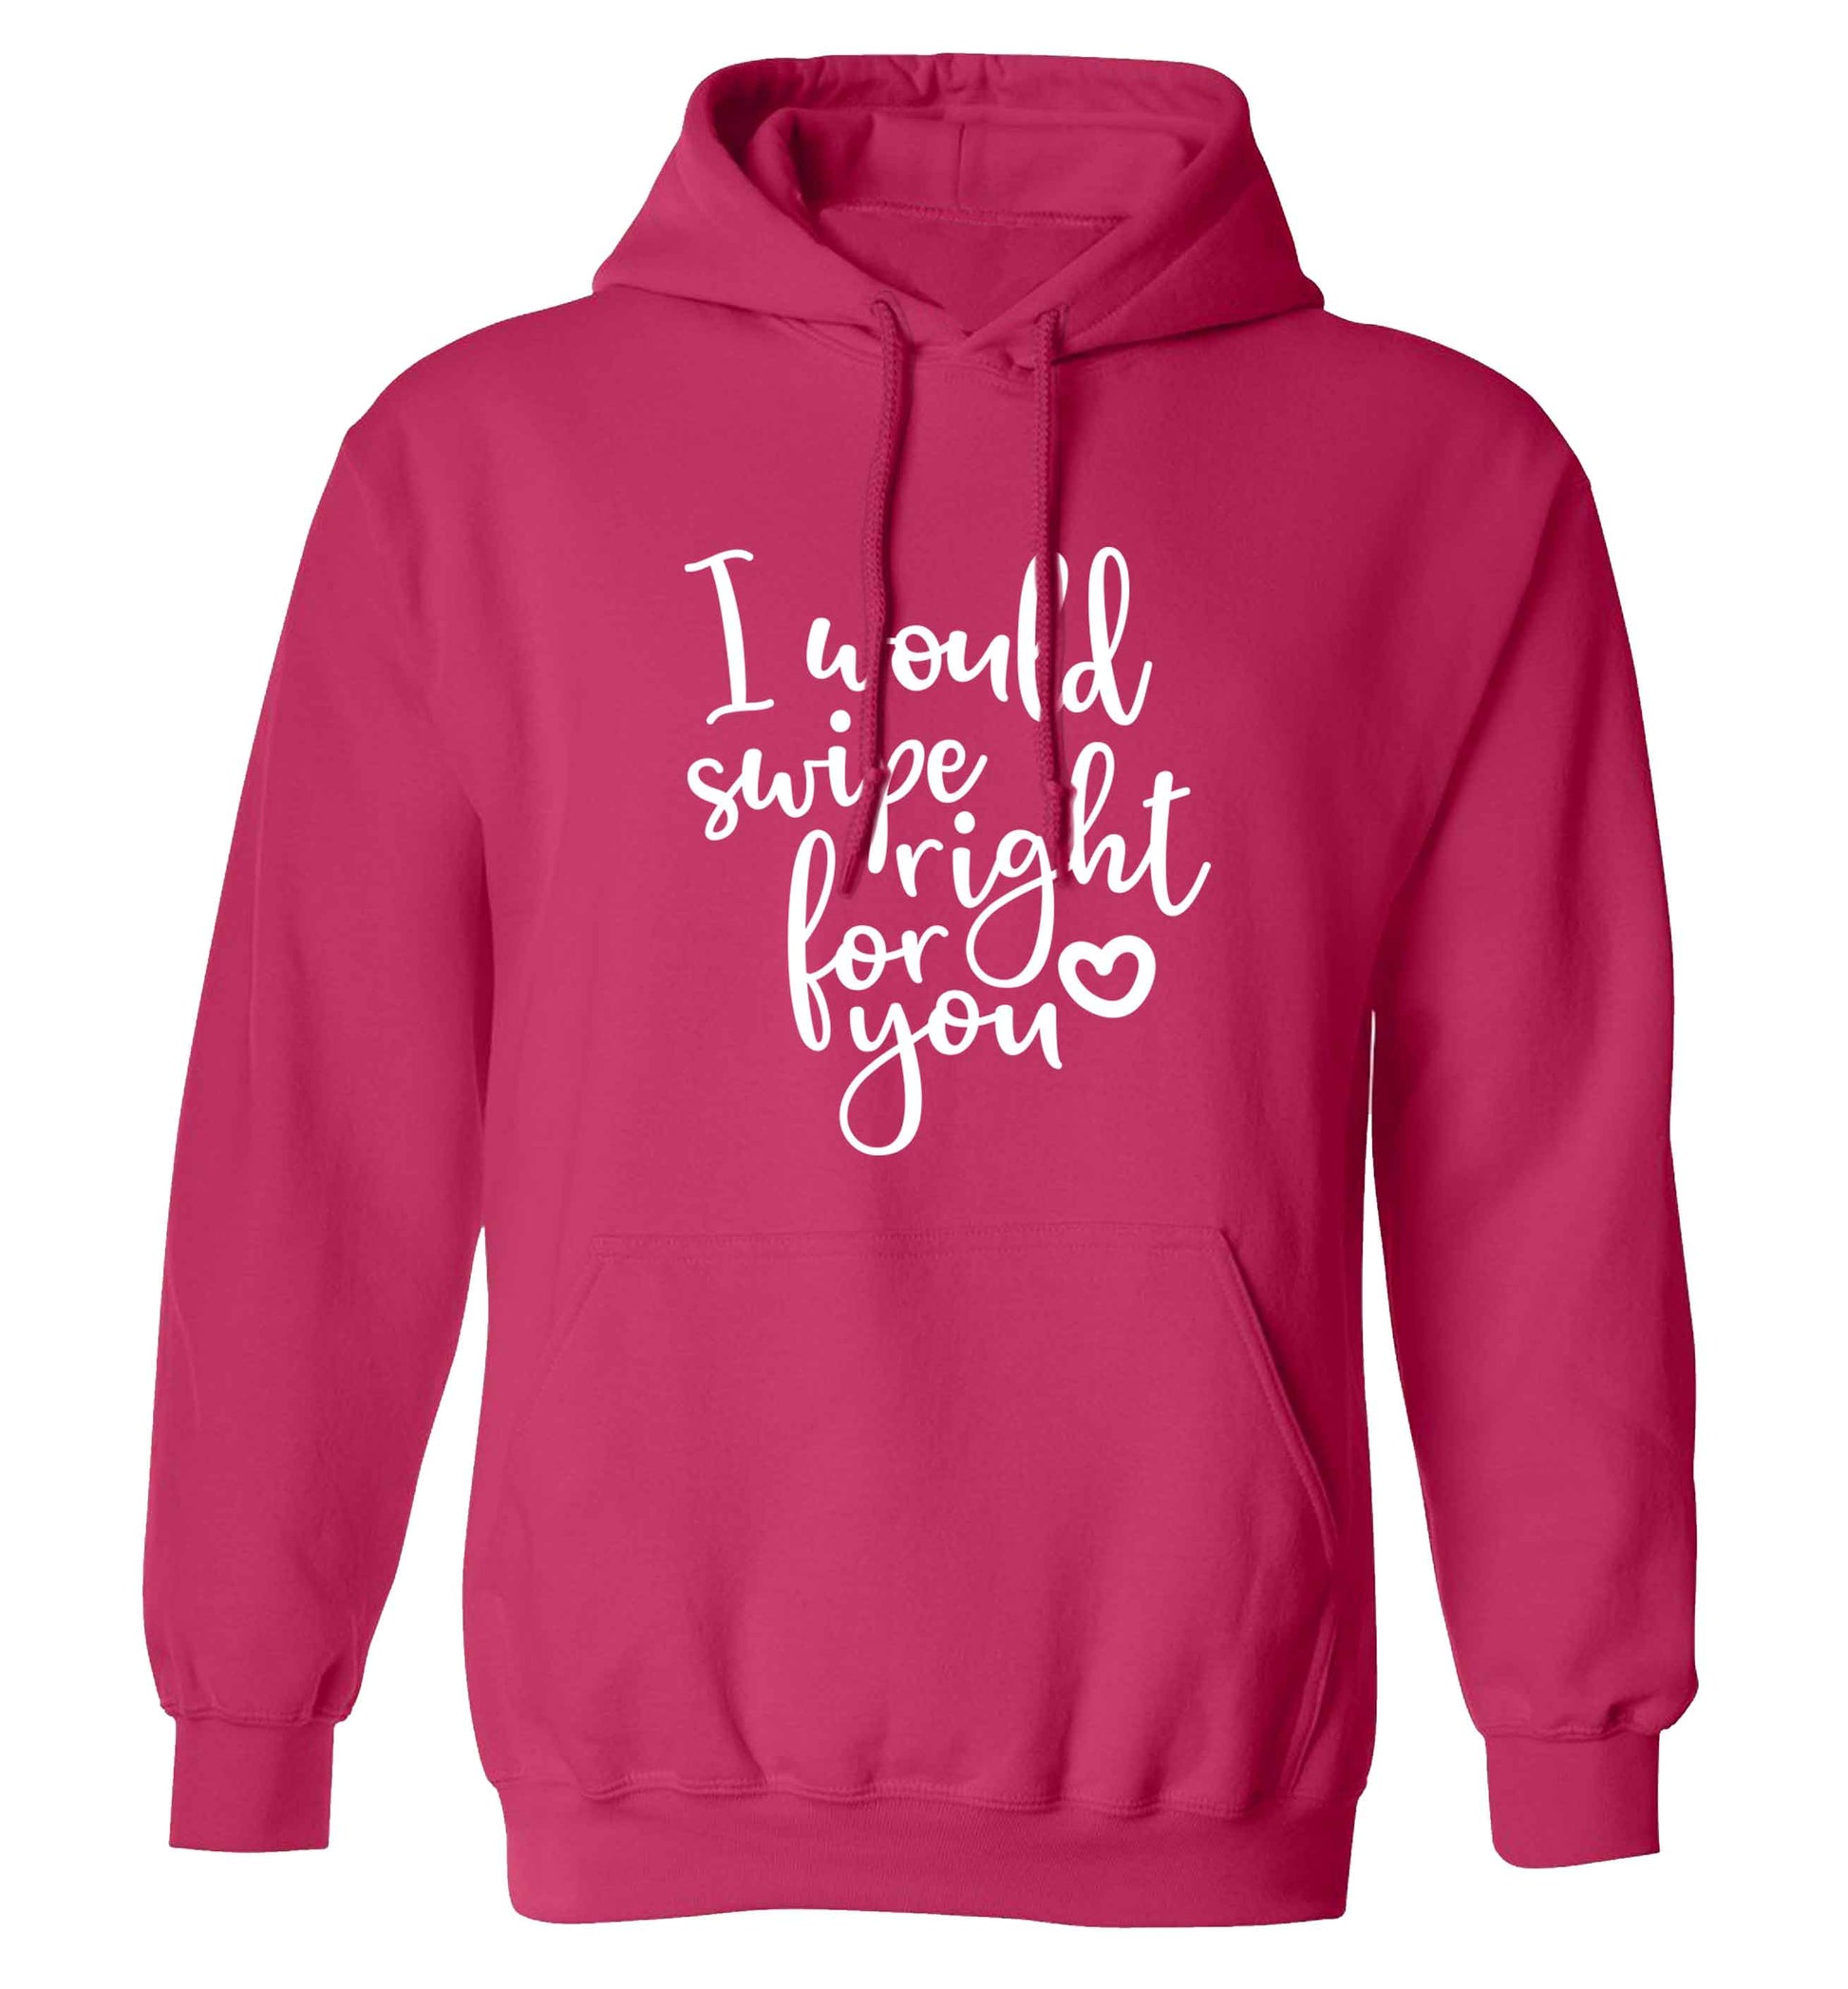 I would swipe right for you adults unisex pink hoodie 2XL